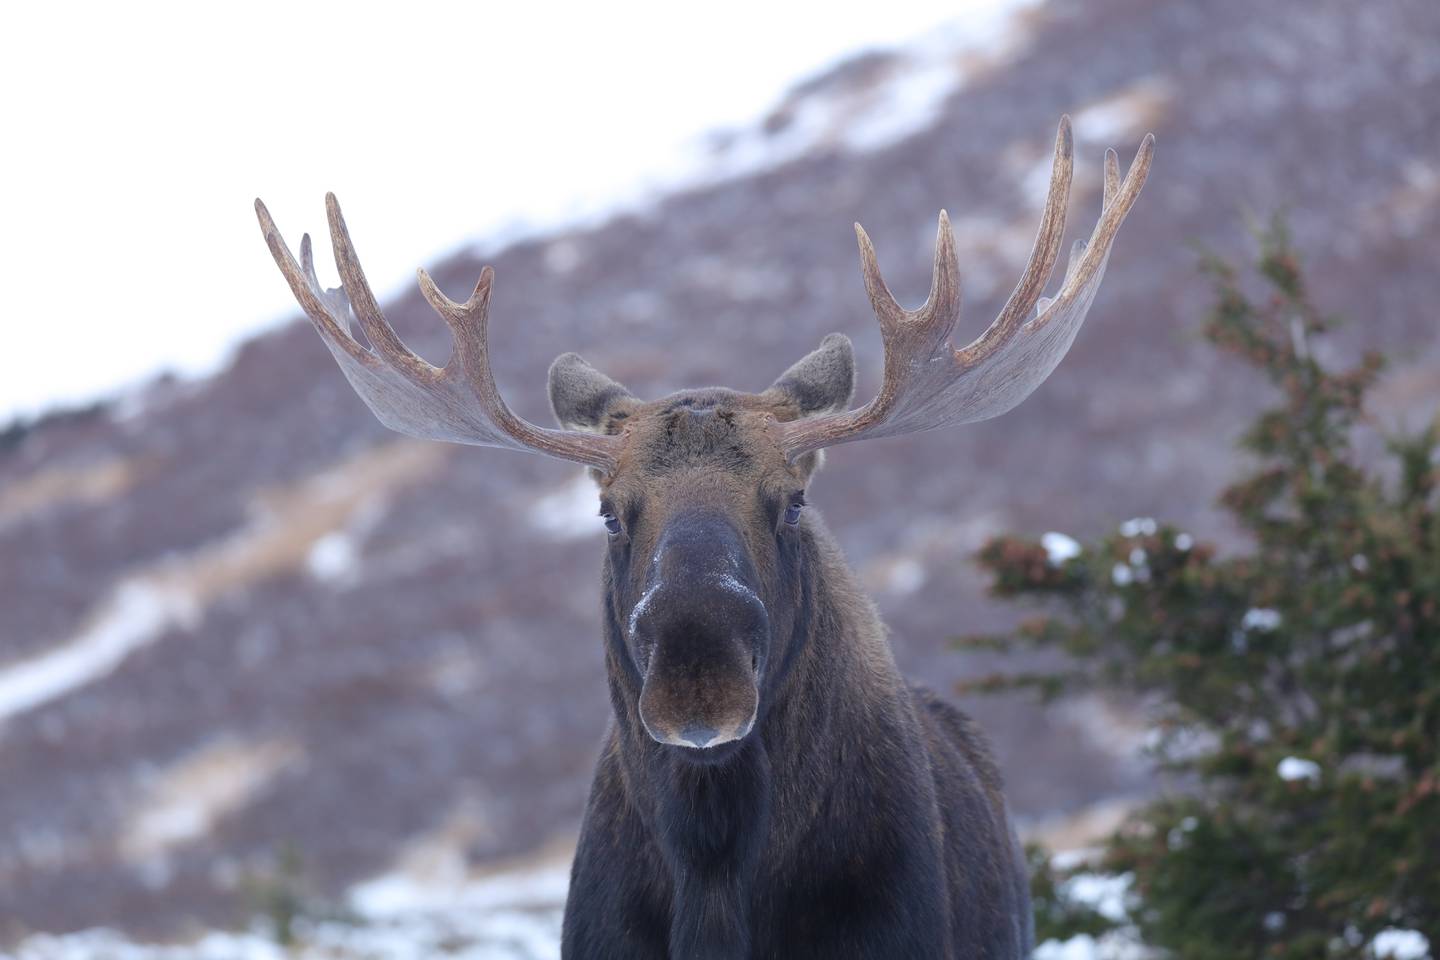 A look from a moose that says you better leave and don’t come back